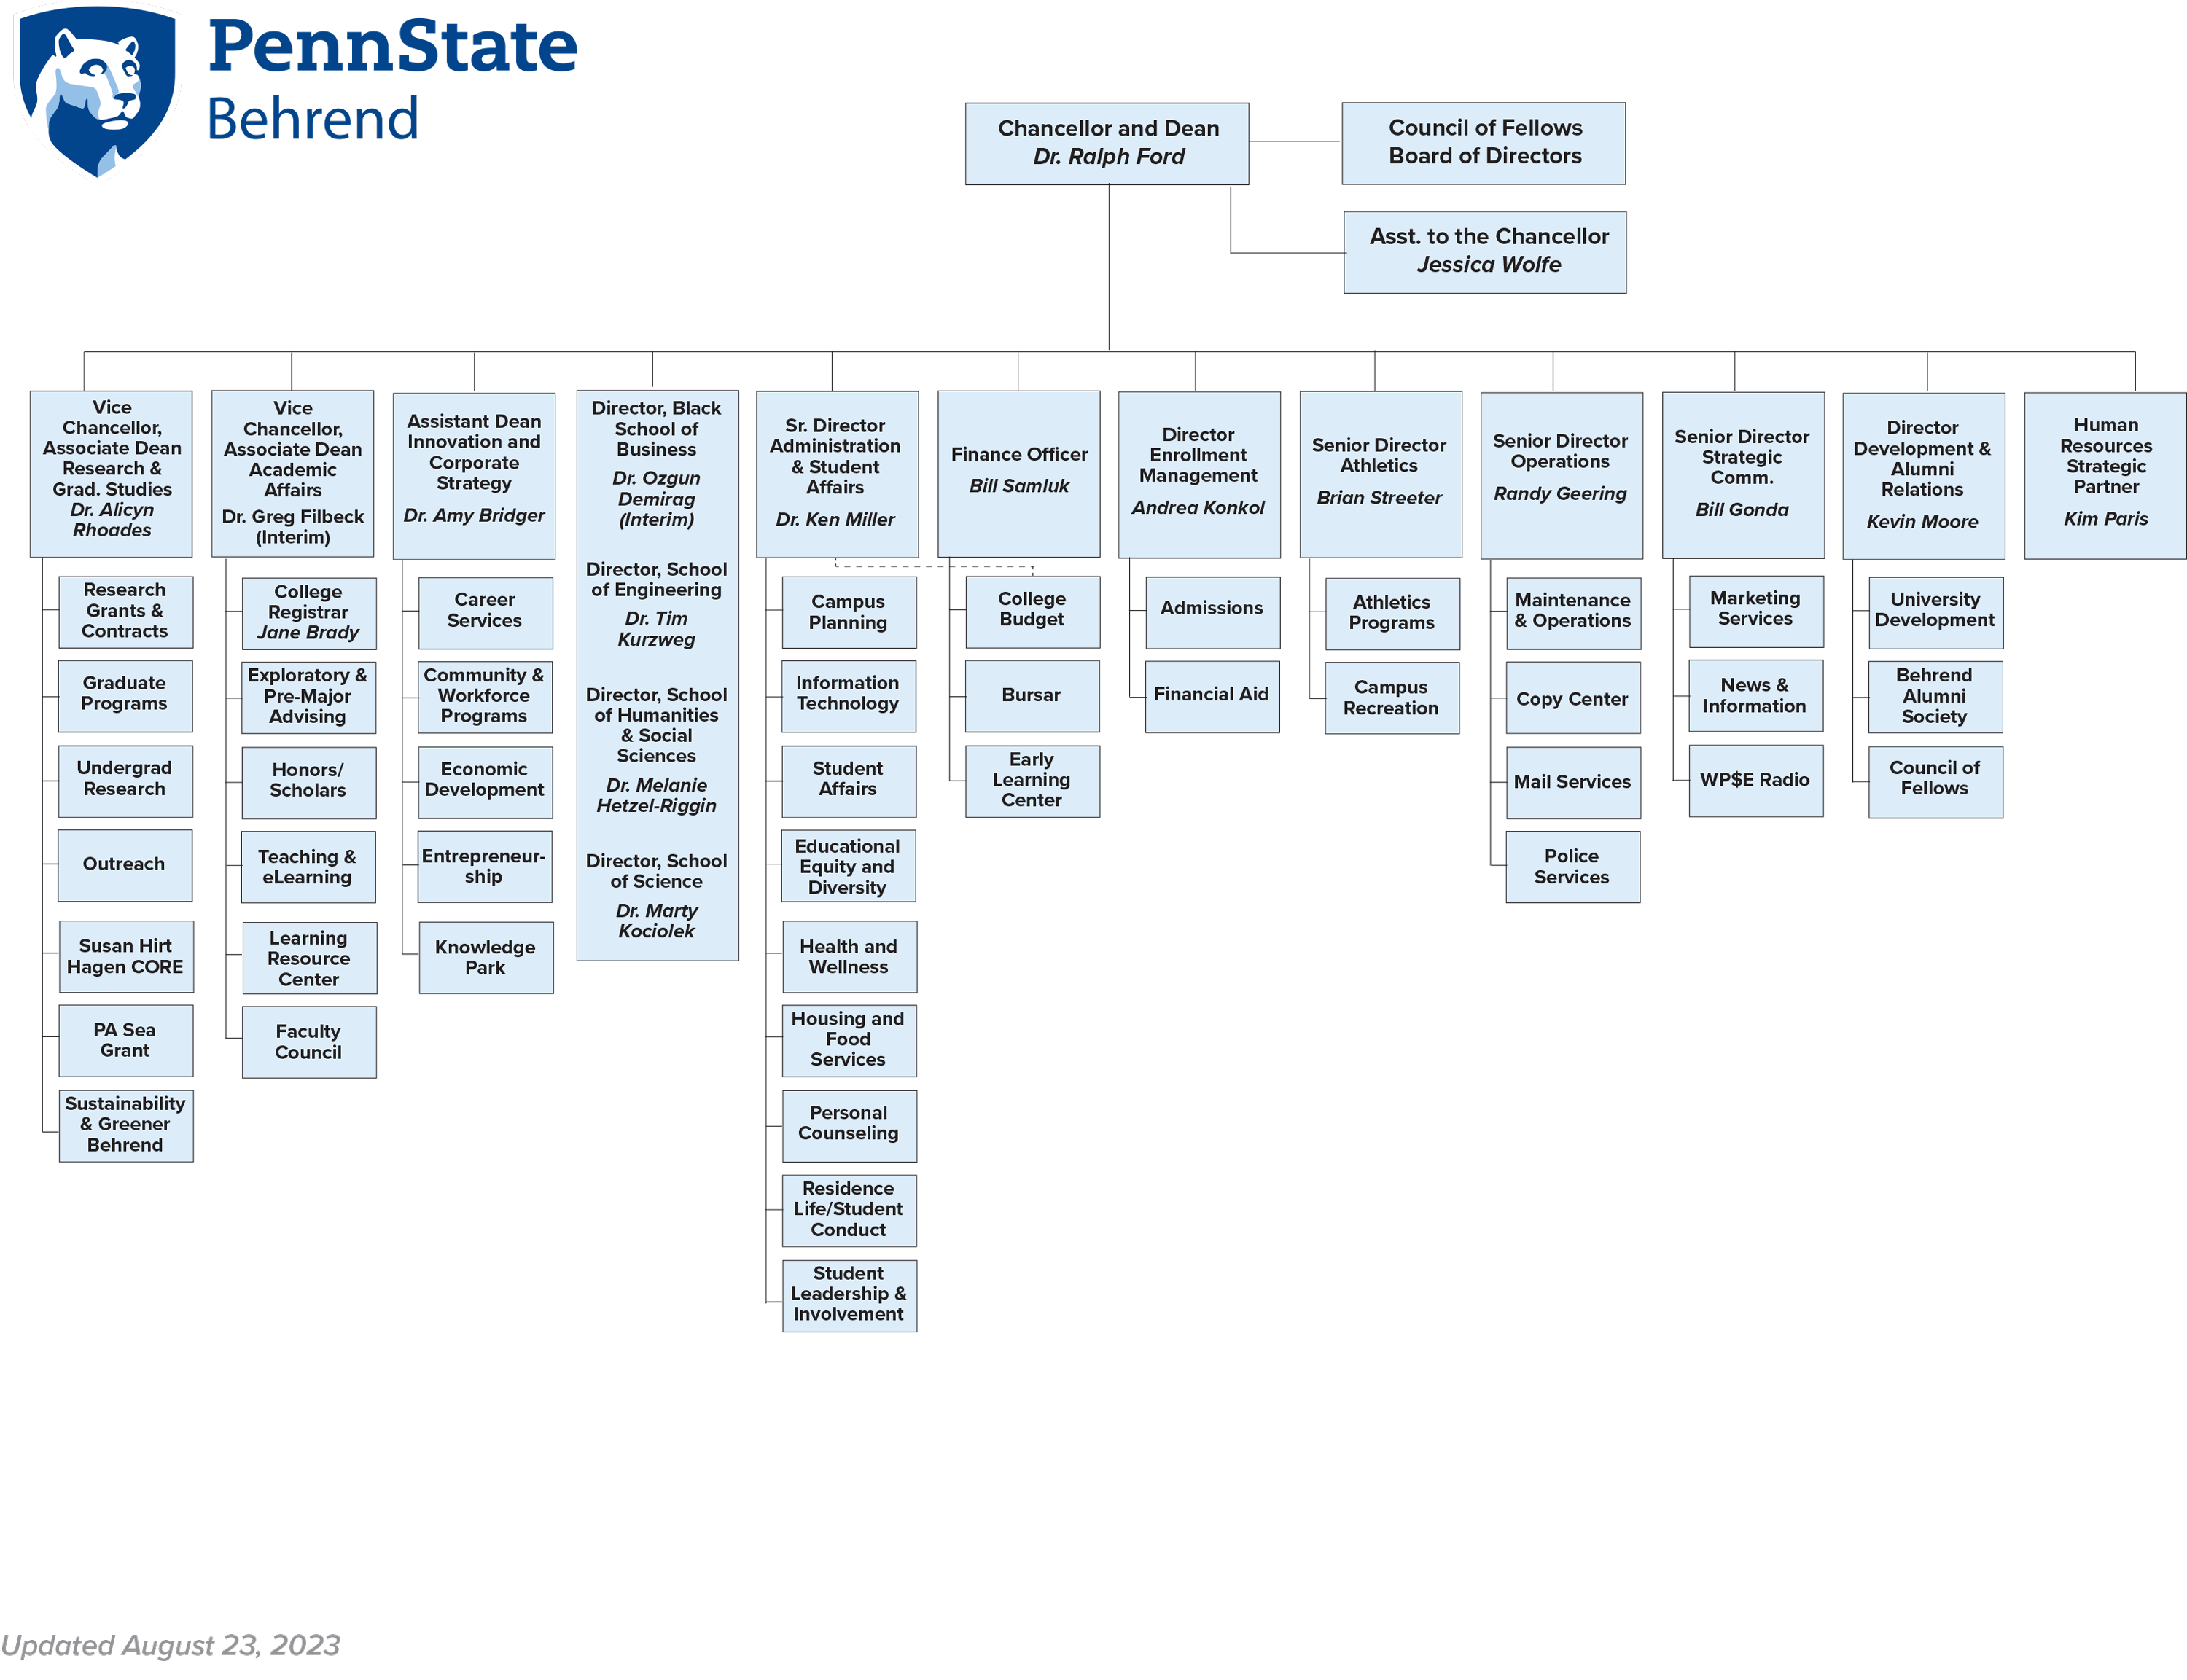 Penn State Behrend Organizational Chart - August 23, 2023: See text under image for full description.